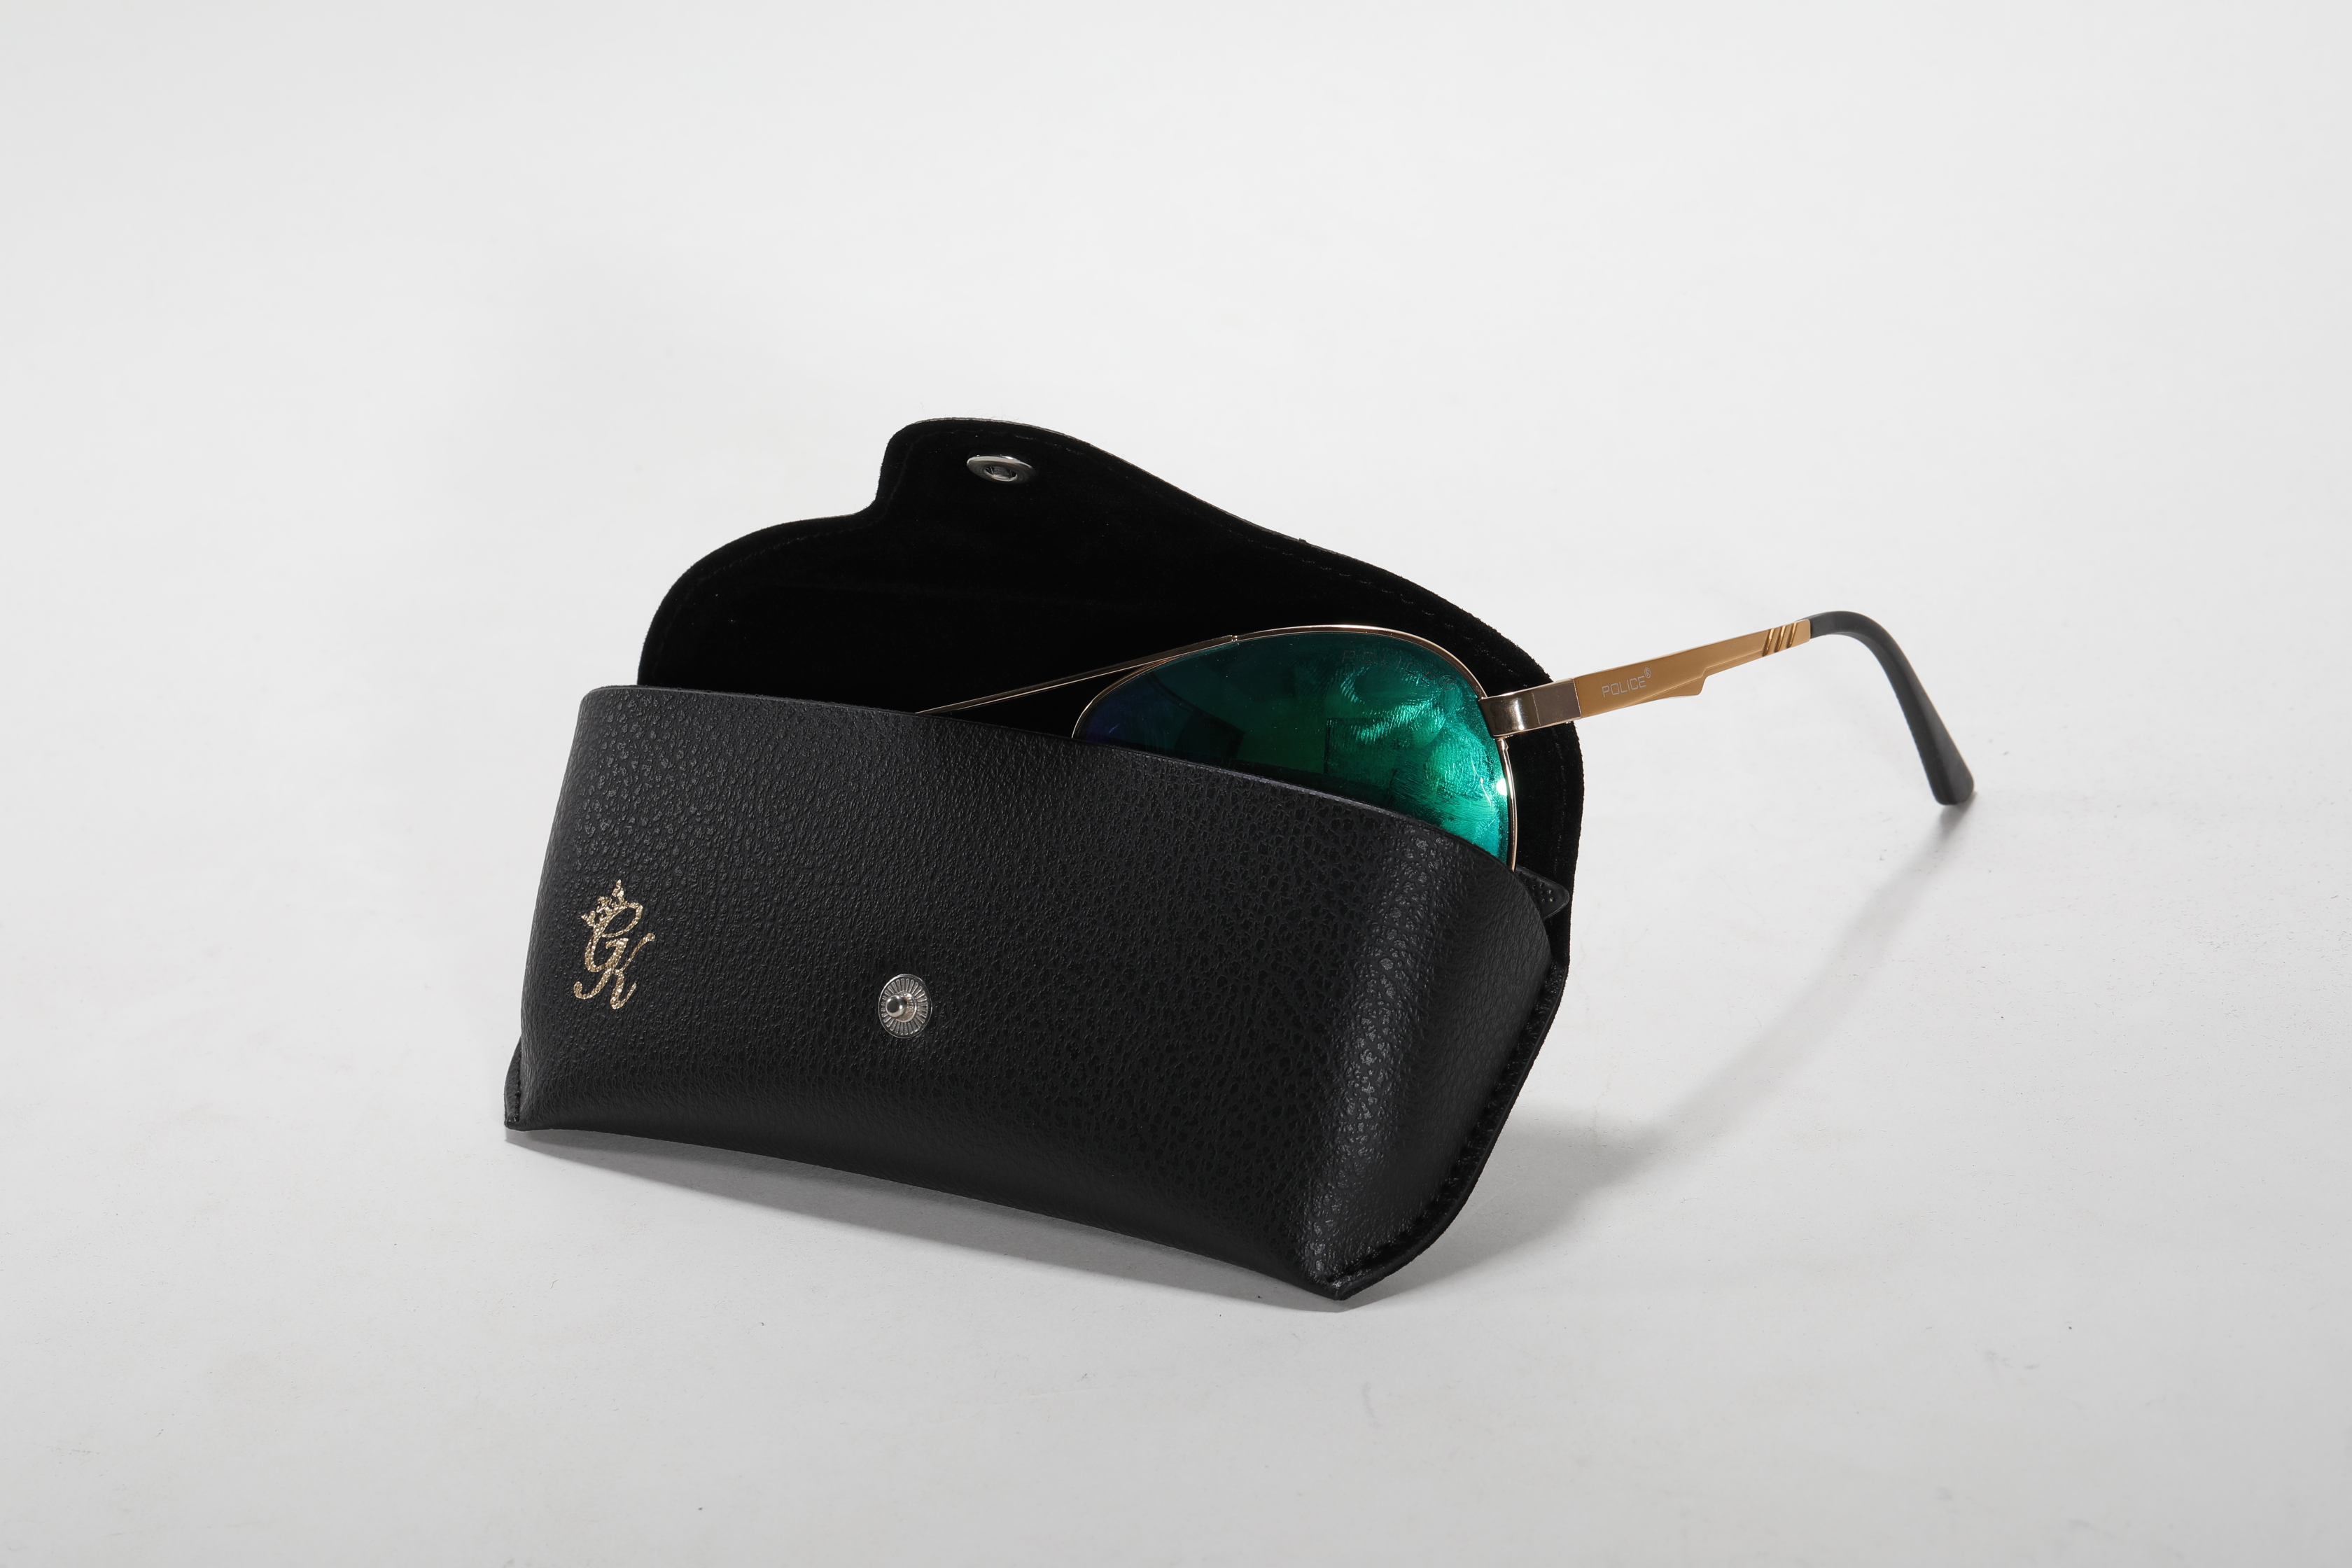 2021 Glasses Box Sunglasses Are Black with LOGO Printed And Look Like A Leather Bag